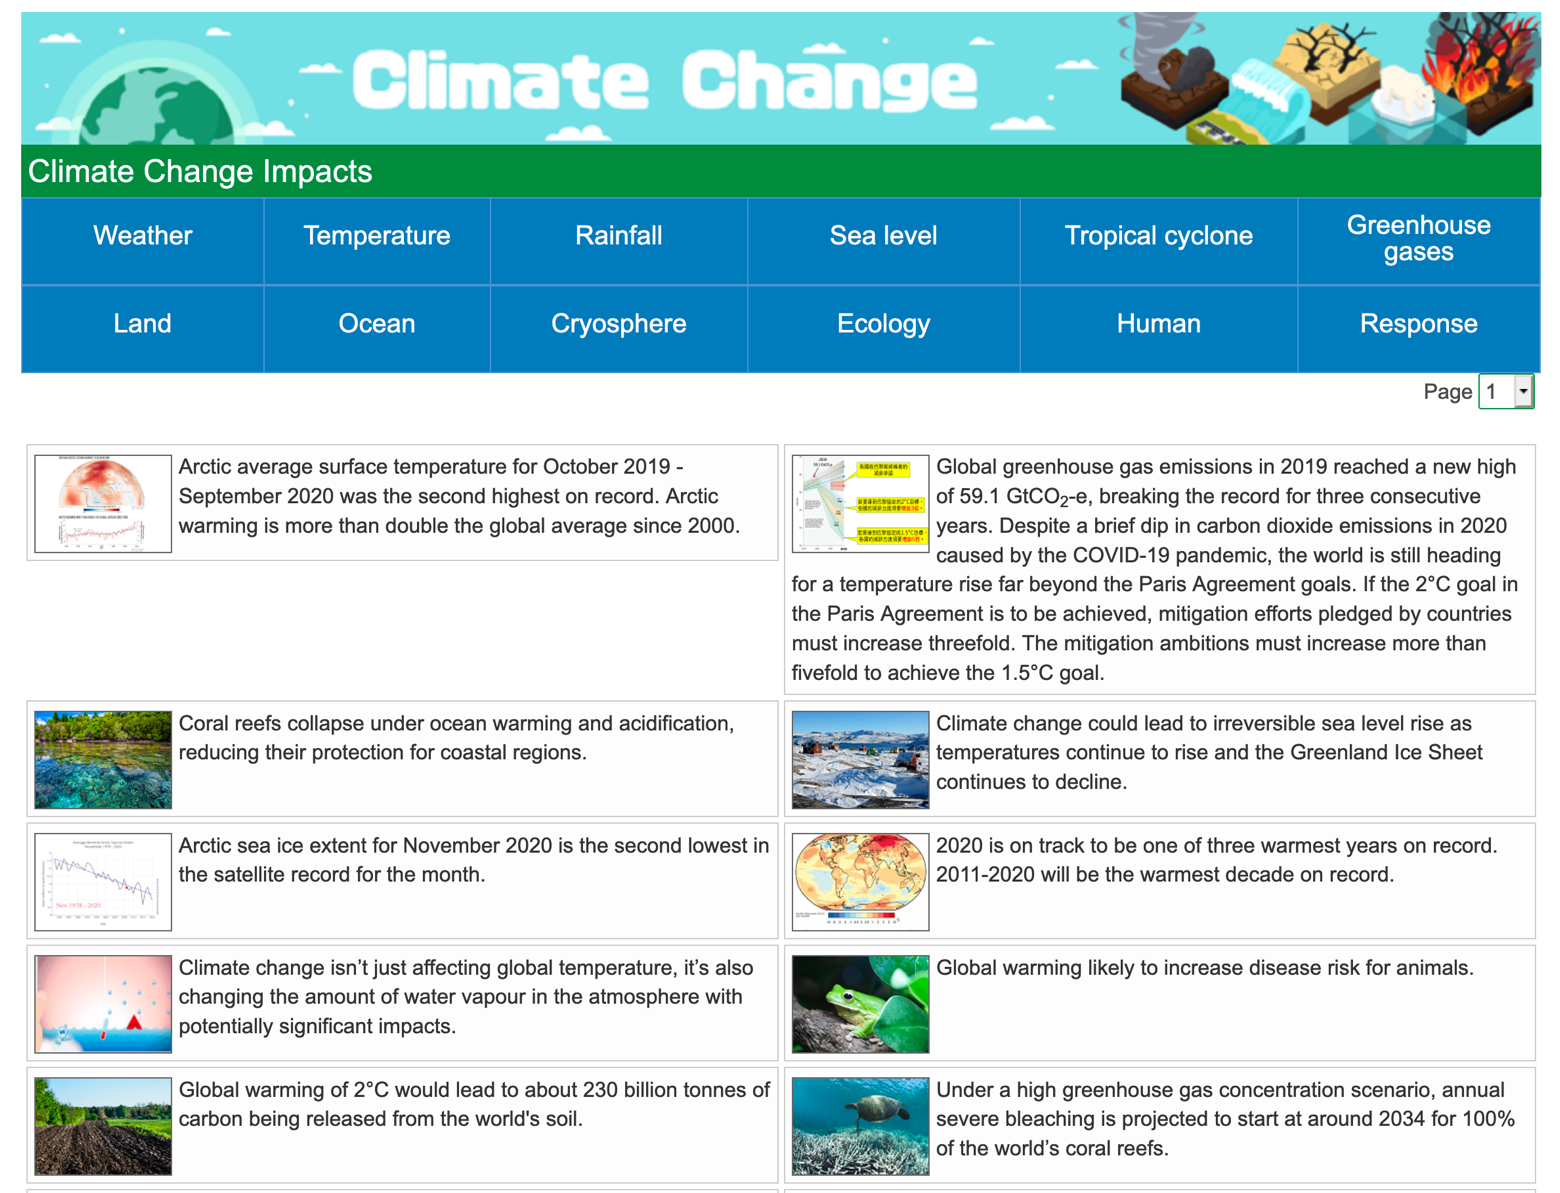 The Climate Change Impacts webpage